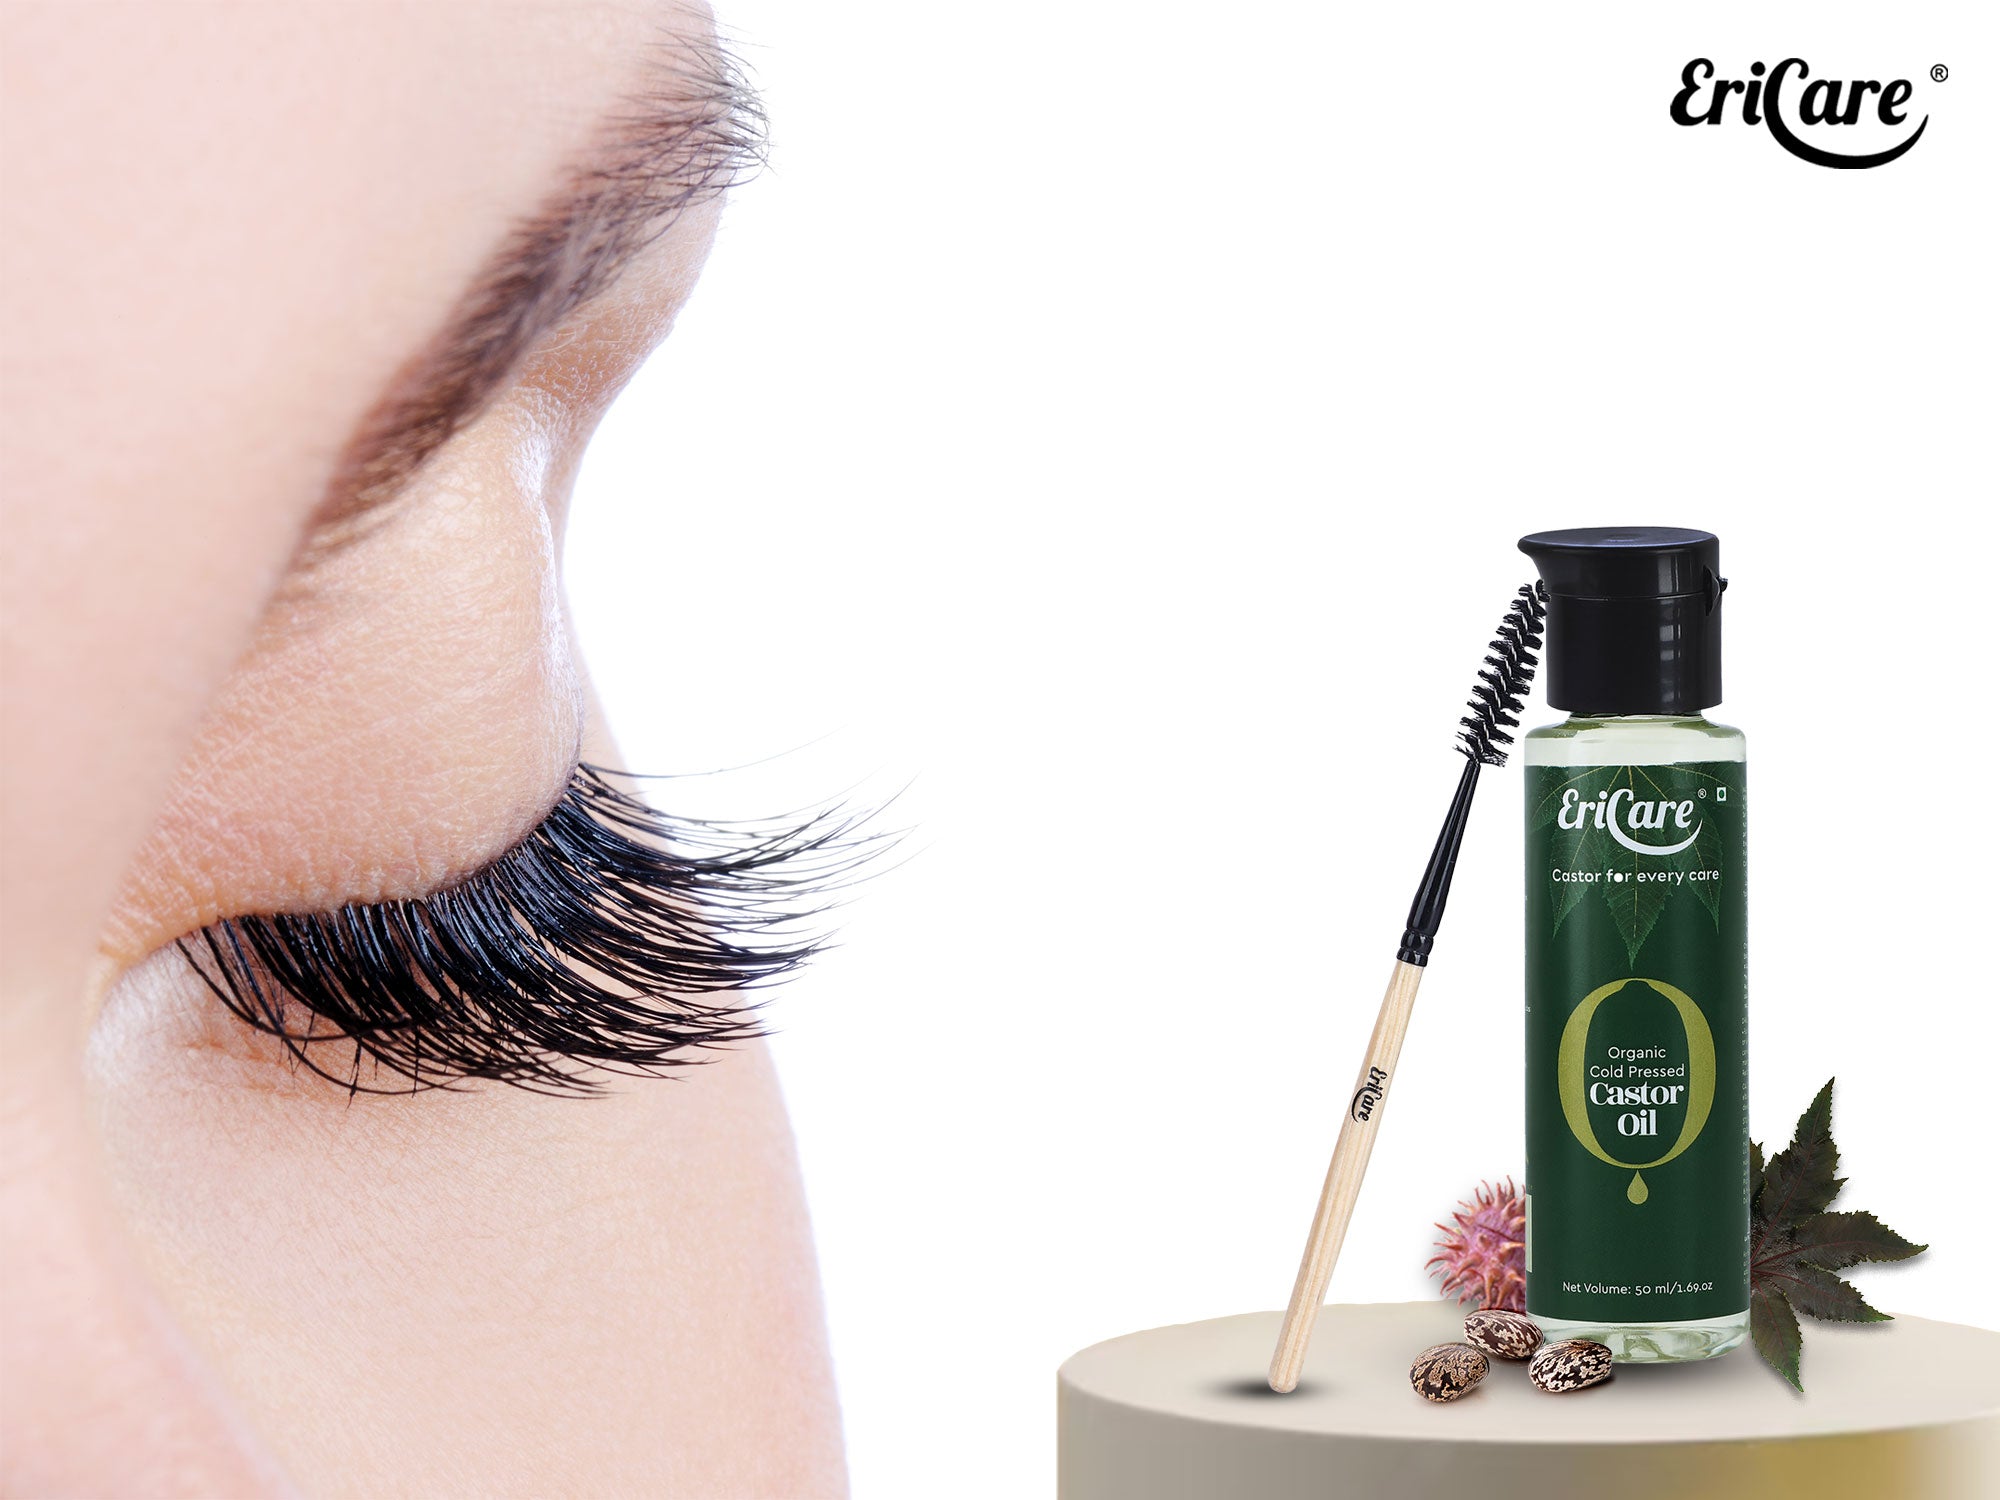 how to use organic castor oil step by step for eyelashes and eyebrows